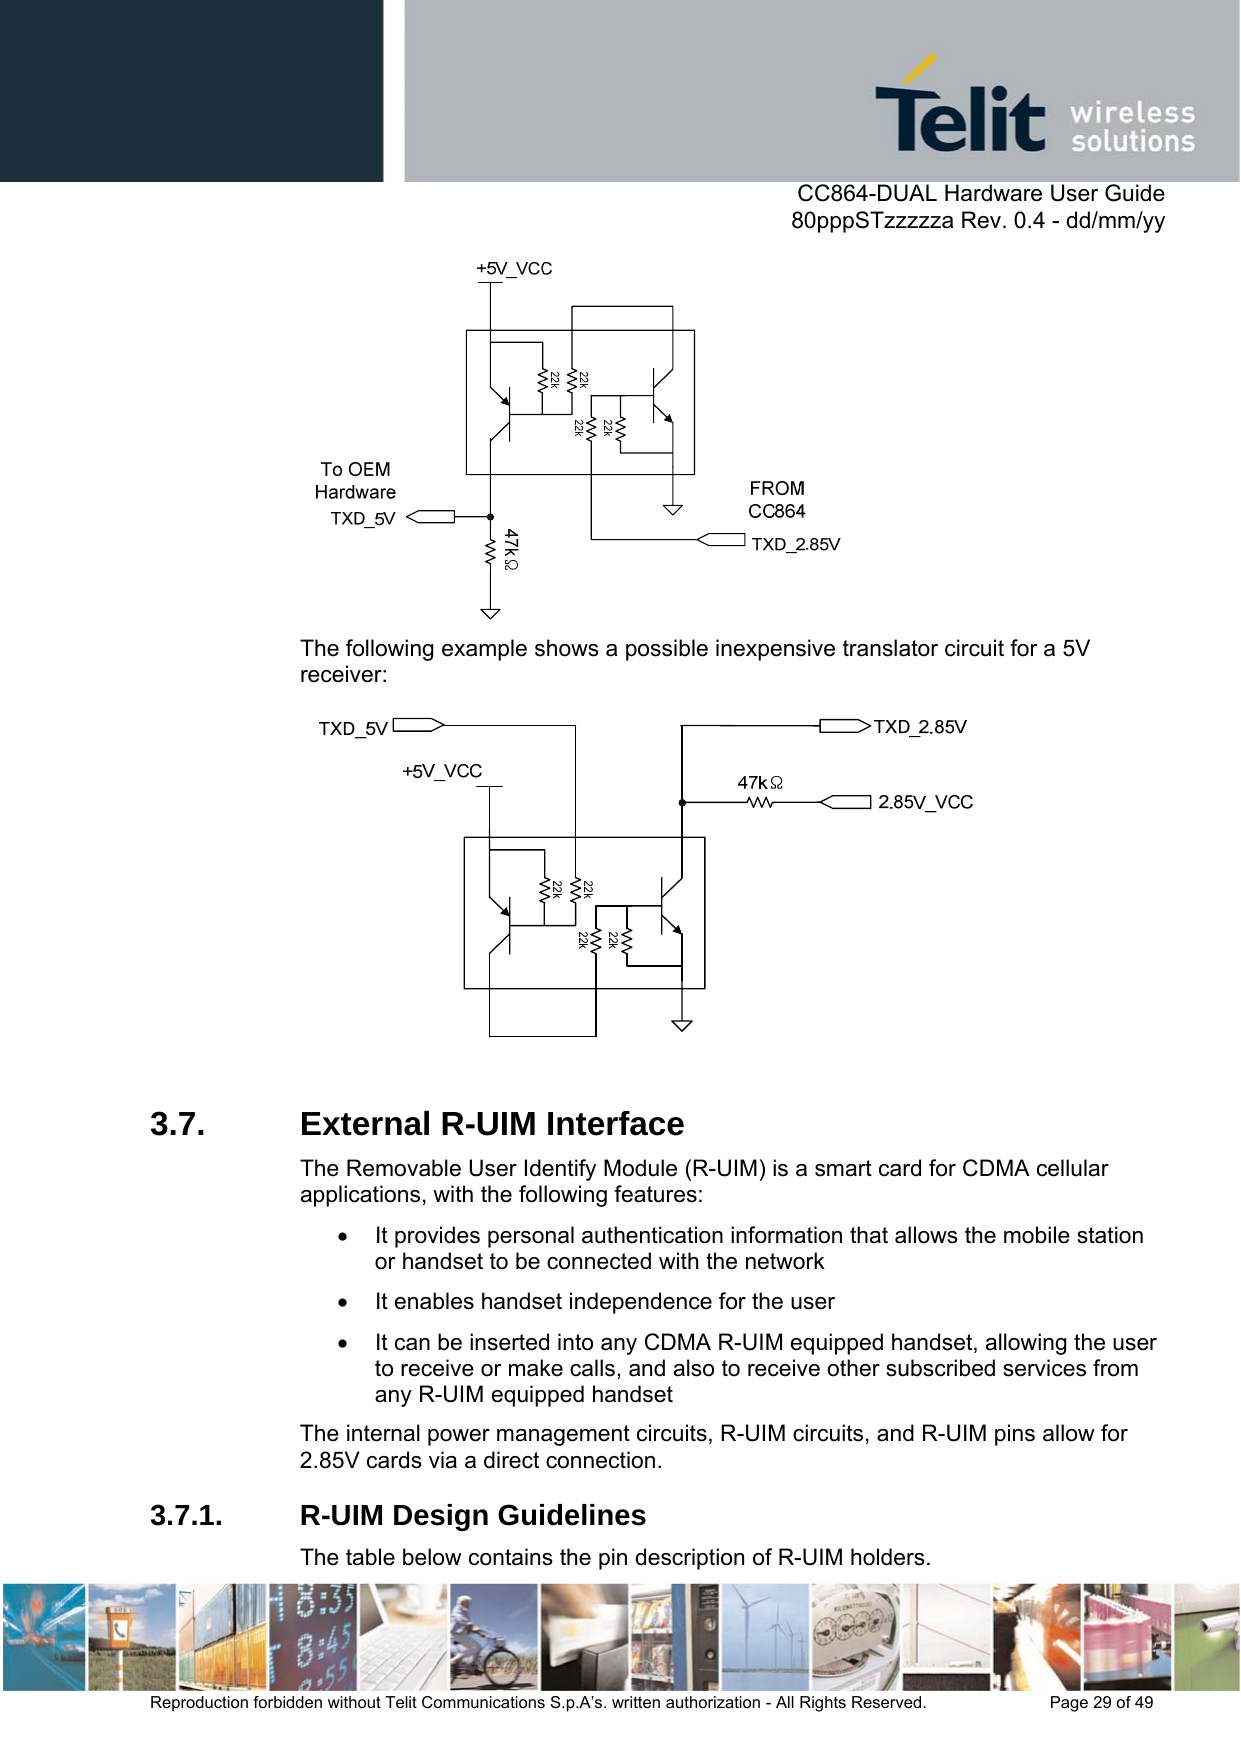      CC864-DUAL Hardware User Guide   80pppSTzzzzza Rev. 0.4 - dd/mm/yy   Reproduction forbidden without Telit Communications S.p.A’s. written authorization - All Rights Reserved.    Page 29 of 49   The following example shows a possible inexpensive translator circuit for a 5V receiver:   3.7. External R-UIM Interface The Removable User Identify Module (R-UIM) is a smart card for CDMA cellular applications, with the following features: •  It provides personal authentication information that allows the mobile station or handset to be connected with the network •  It enables handset independence for the user •  It can be inserted into any CDMA R-UIM equipped handset, allowing the user to receive or make calls, and also to receive other subscribed services from any R-UIM equipped handset The internal power management circuits, R-UIM circuits, and R-UIM pins allow for 2.85V cards via a direct connection. 3.7.1.  R-UIM Design Guidelines The table below contains the pin description of R-UIM holders. 